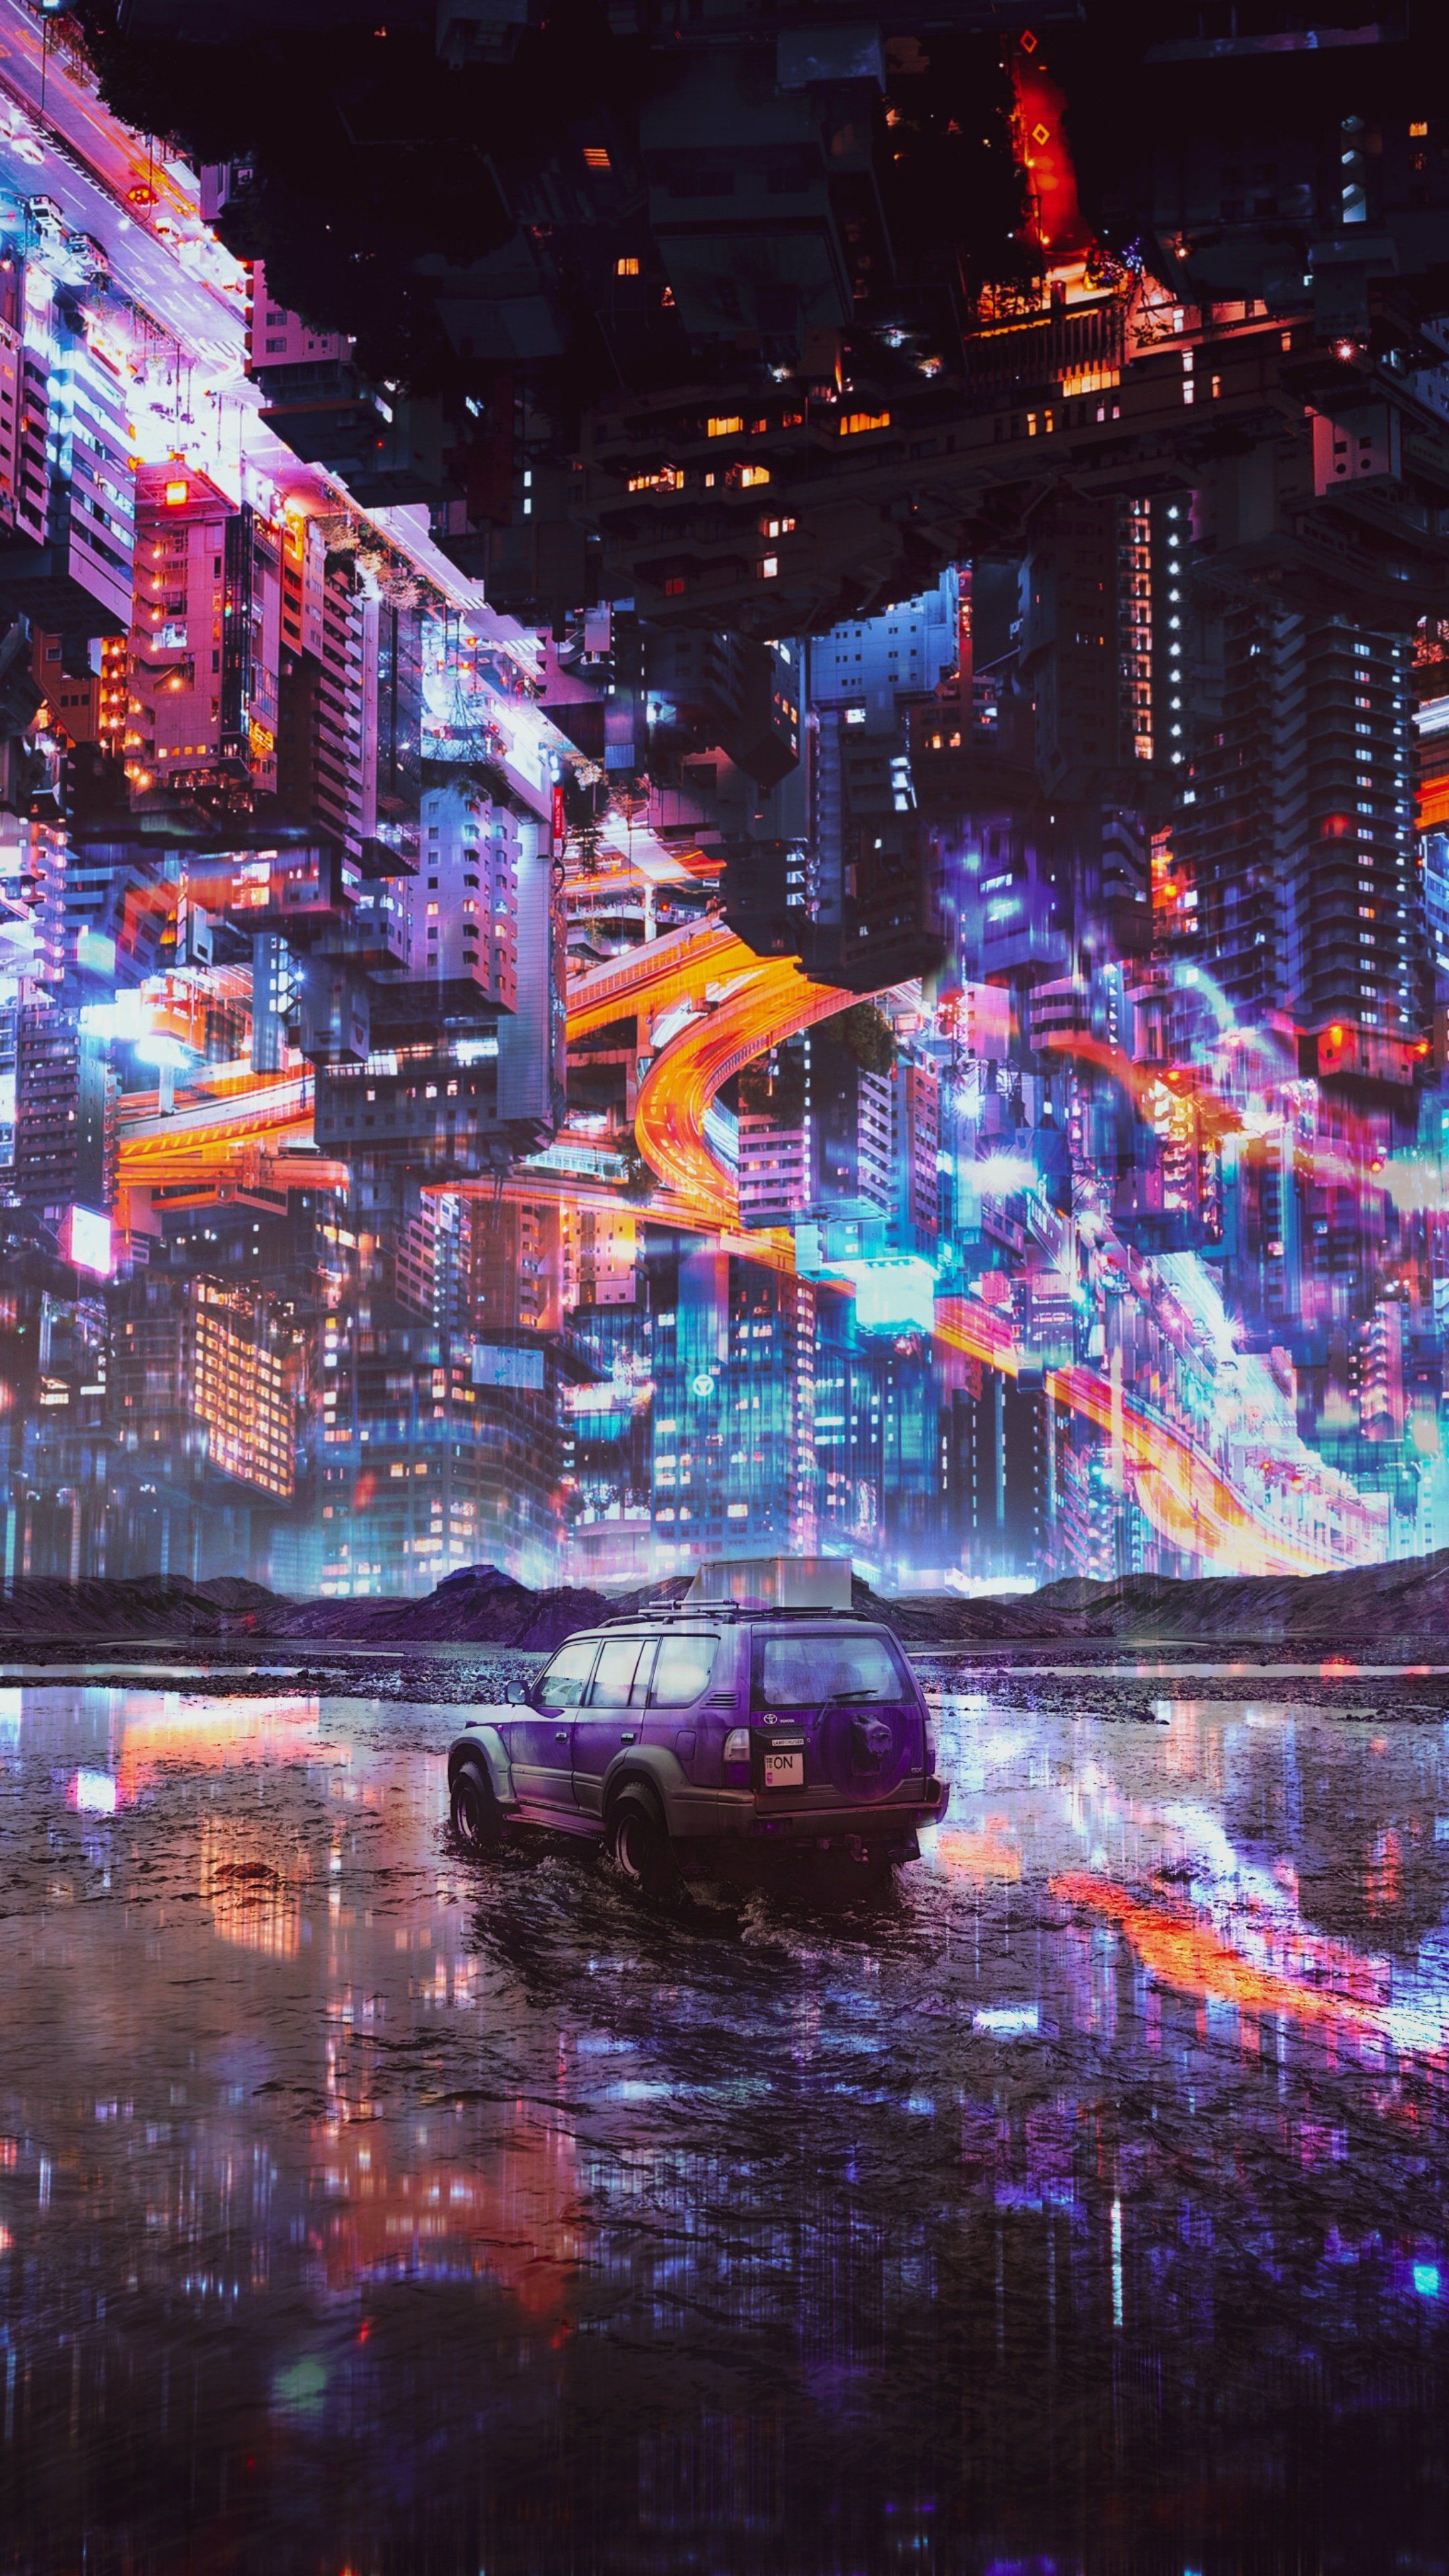 A car is driving through the city - Cityscape